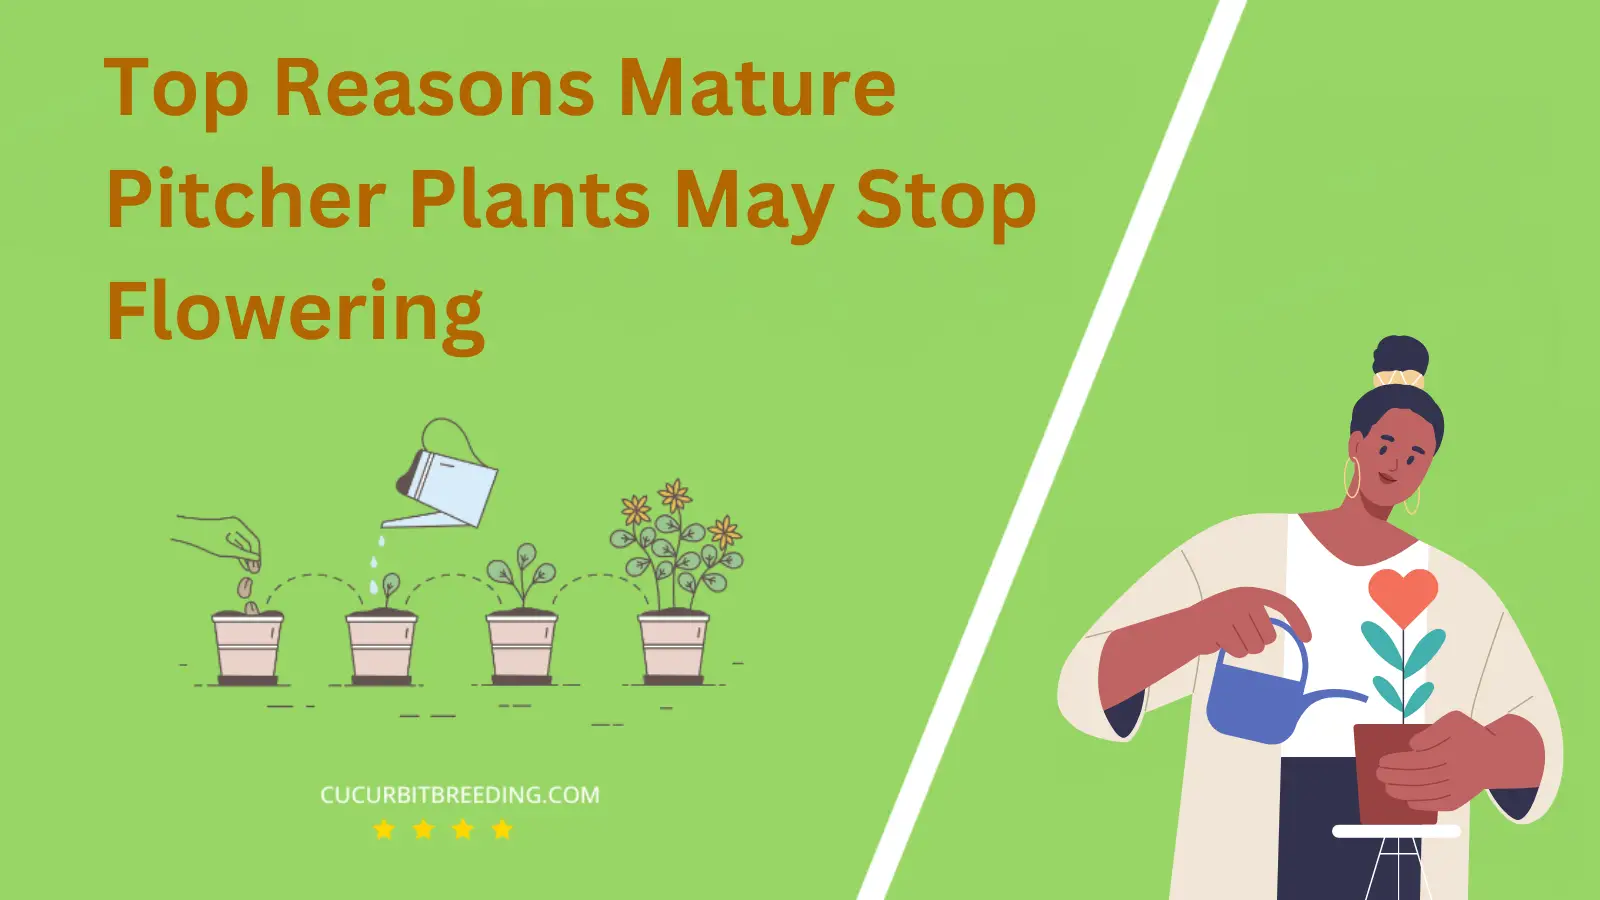 Top Reasons Mature Pitcher Plants May Stop Flowering